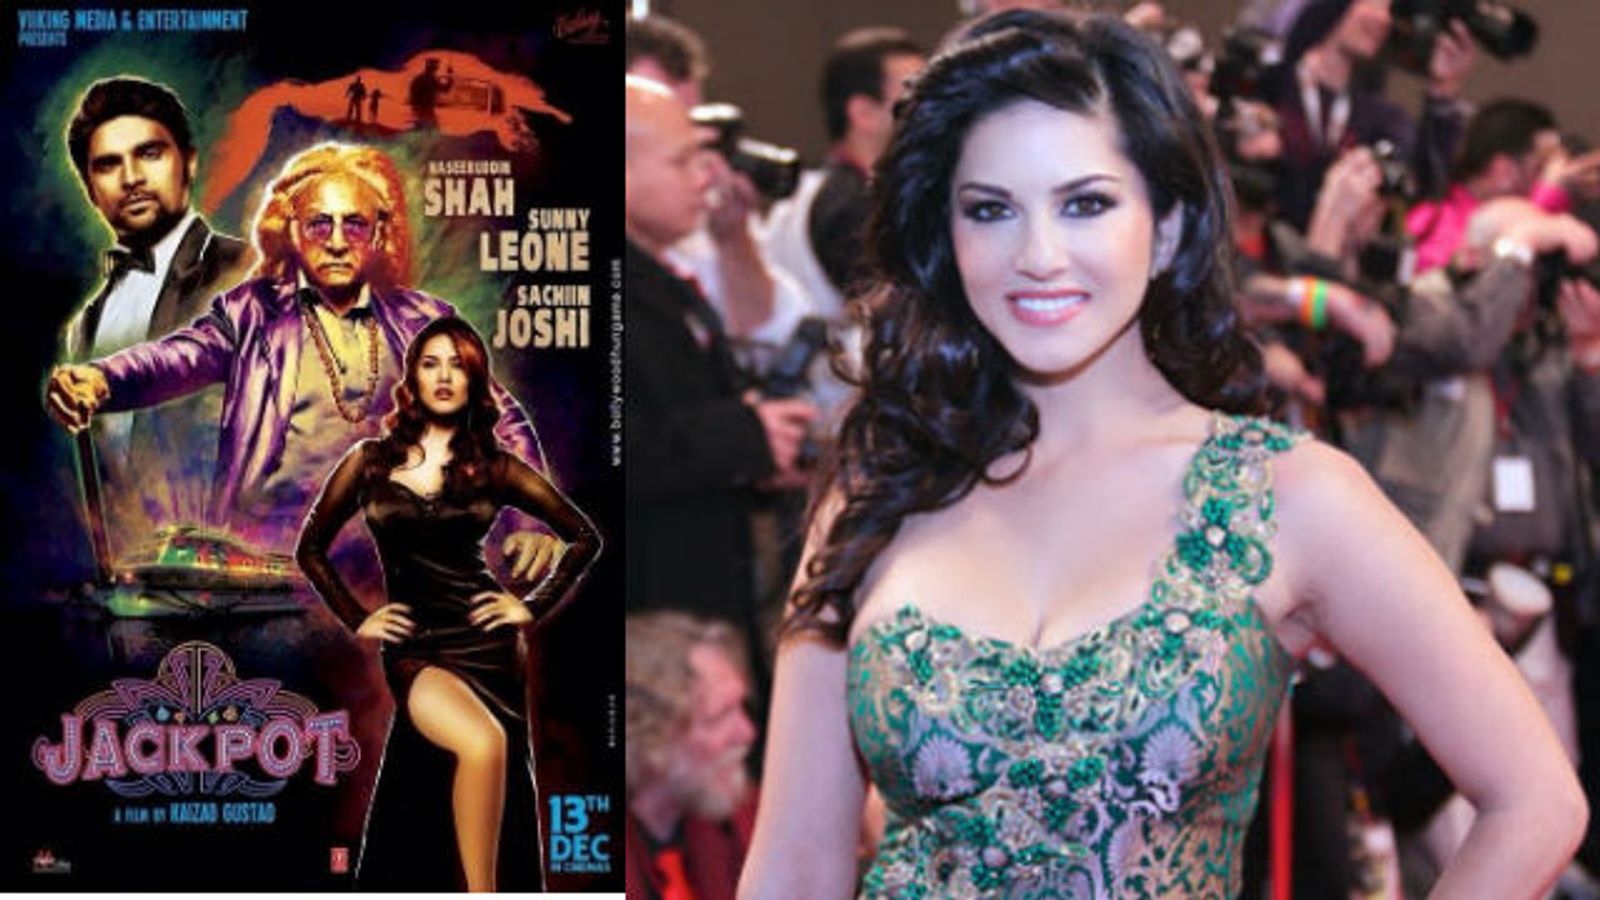 Trailer Released for Sunny Leone Bollywood Feature 'Jackpot'